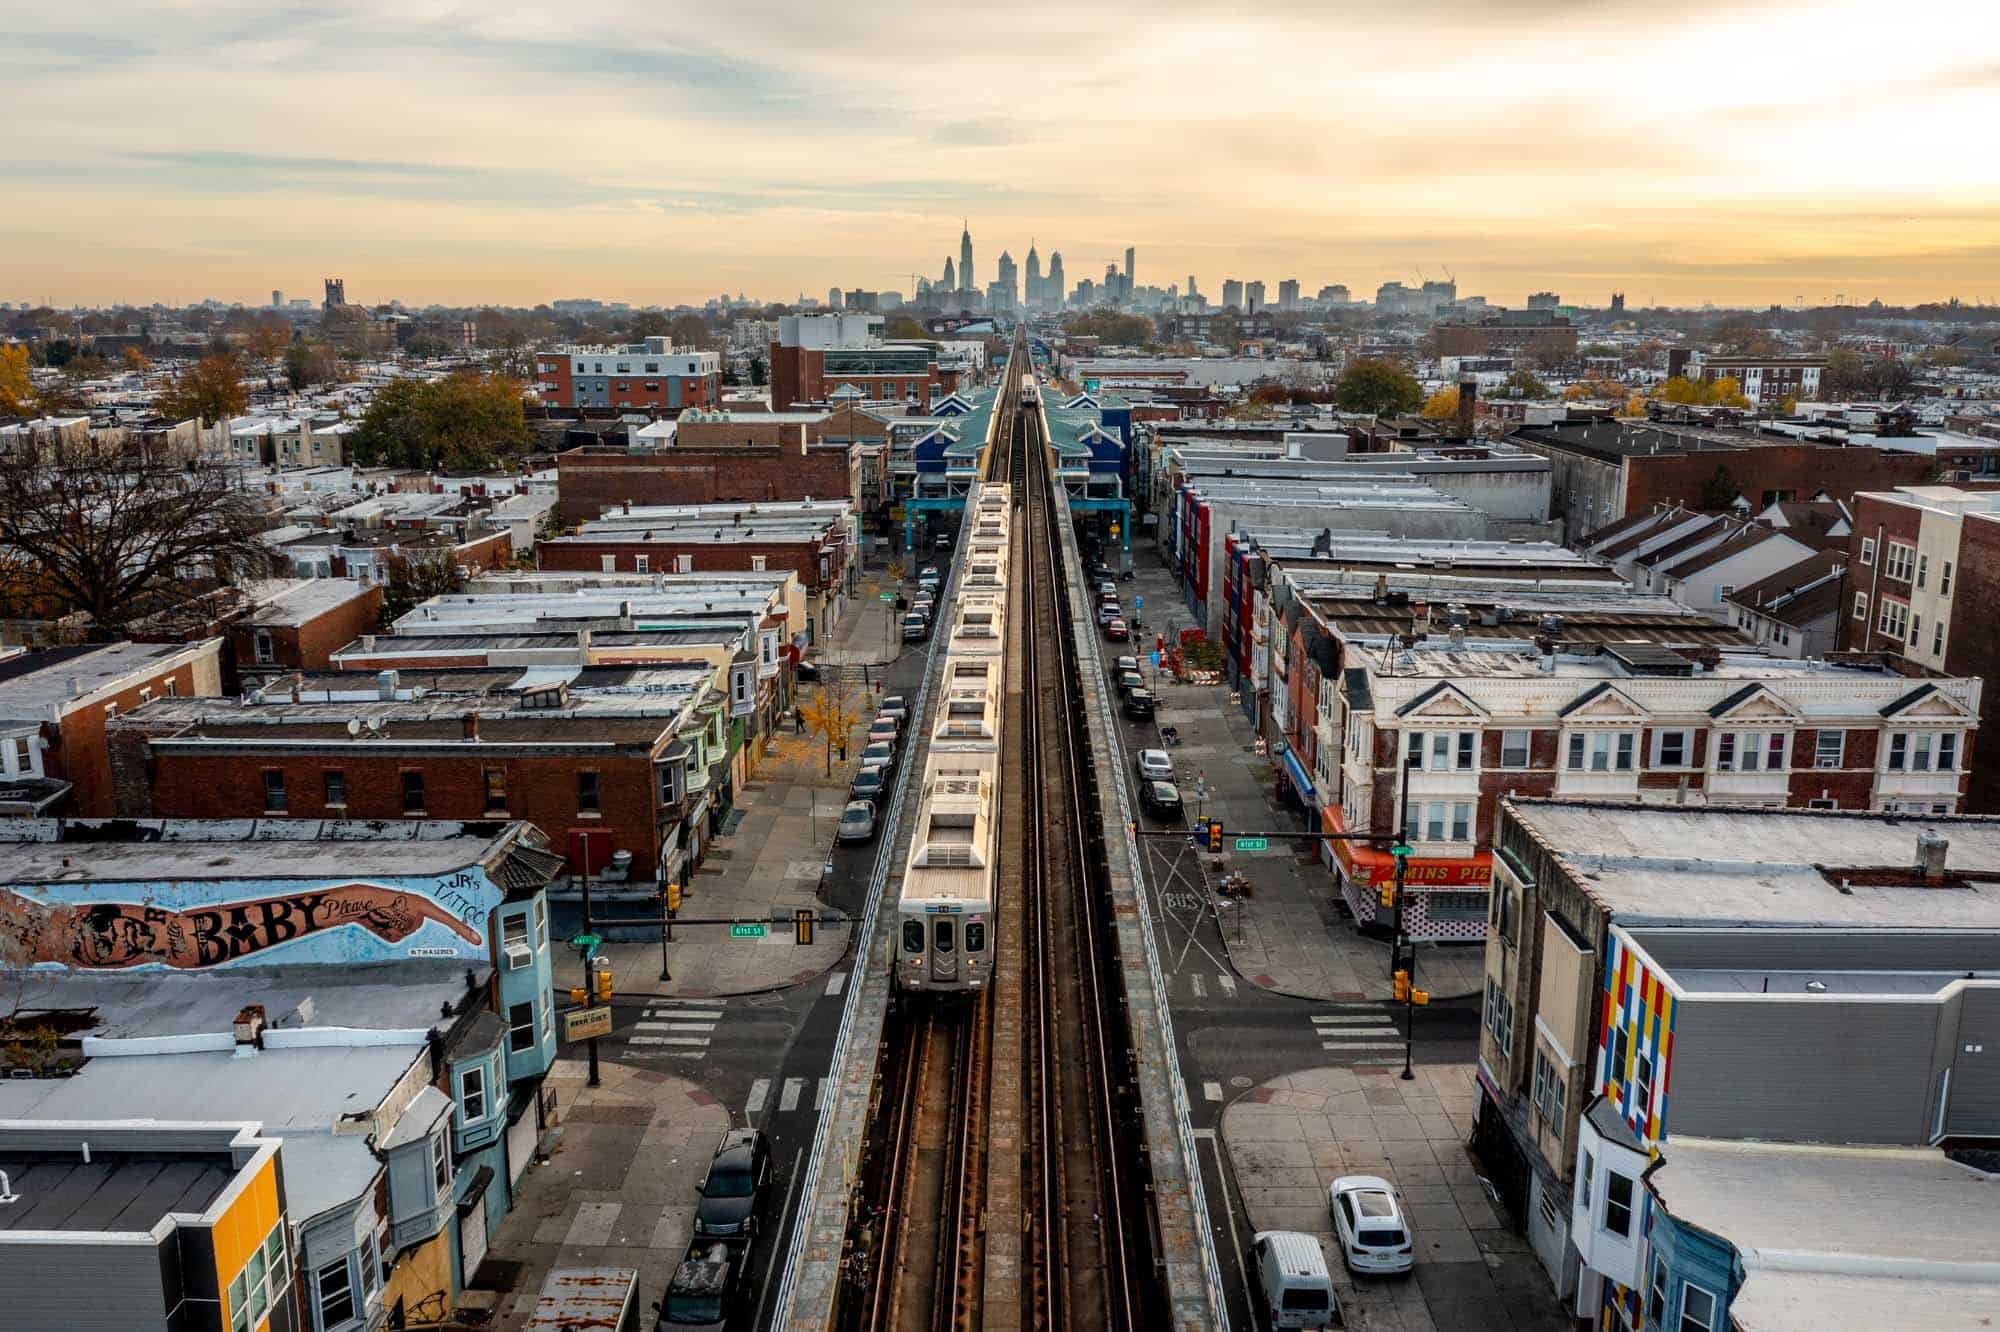 An elevated train in West Philly with the skyline in the distance